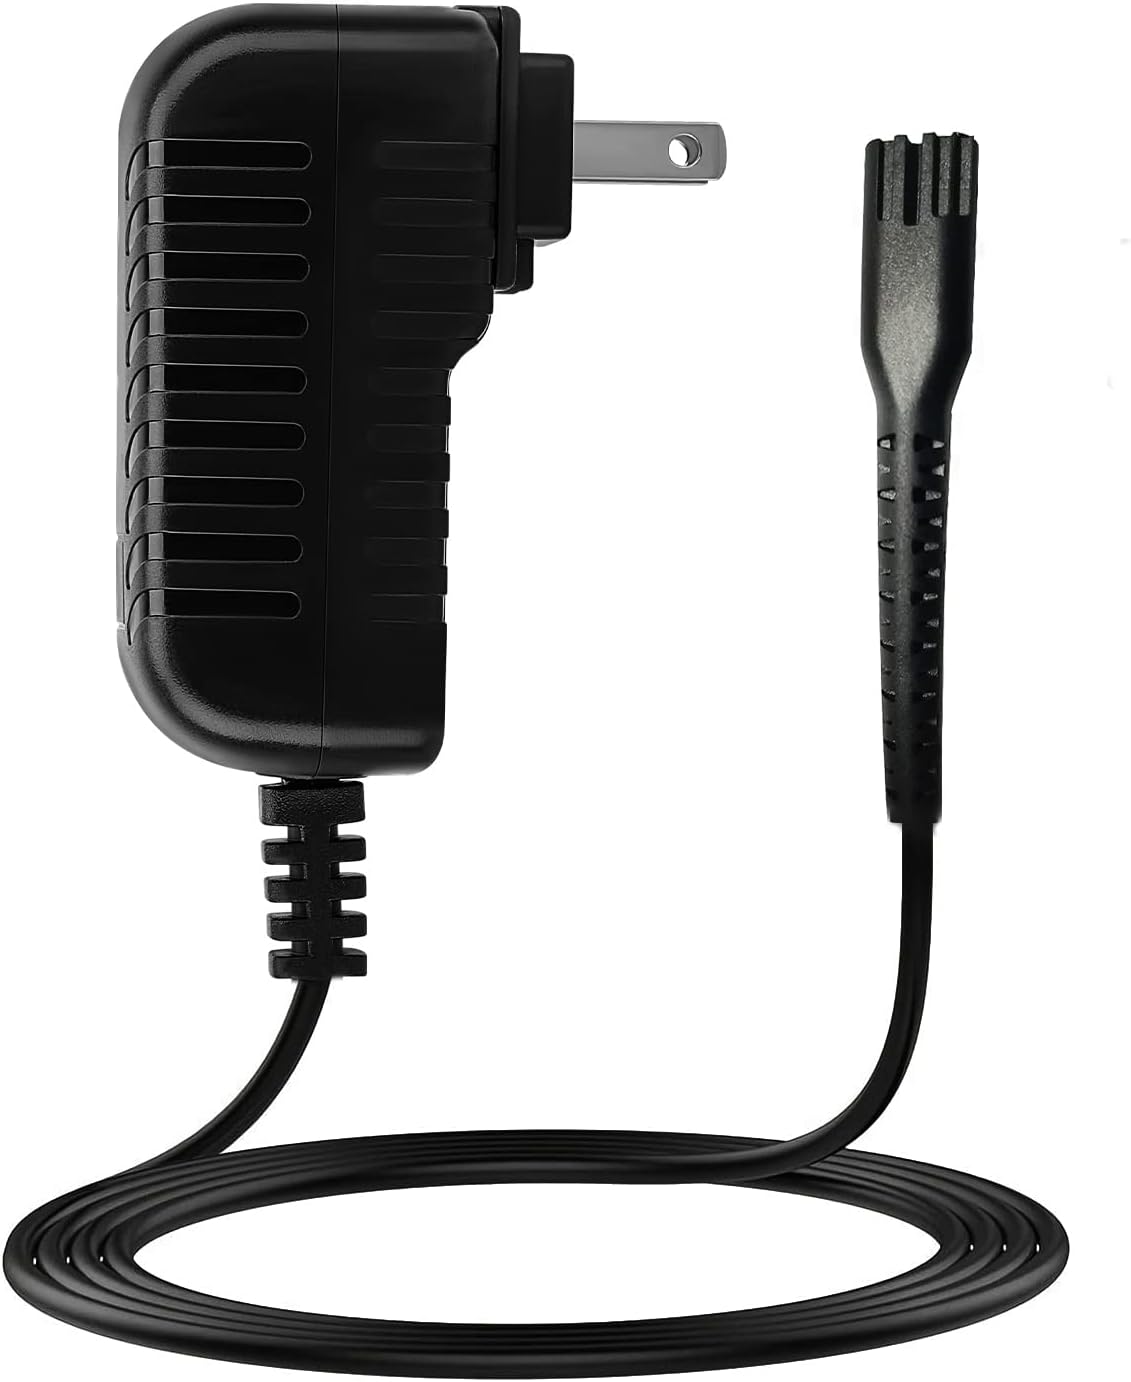 for Wahl Cordless Clippers Charger, Professional Replacement 4V Clipper Charger Cord for All Wahl Magic Clip Senior Ster